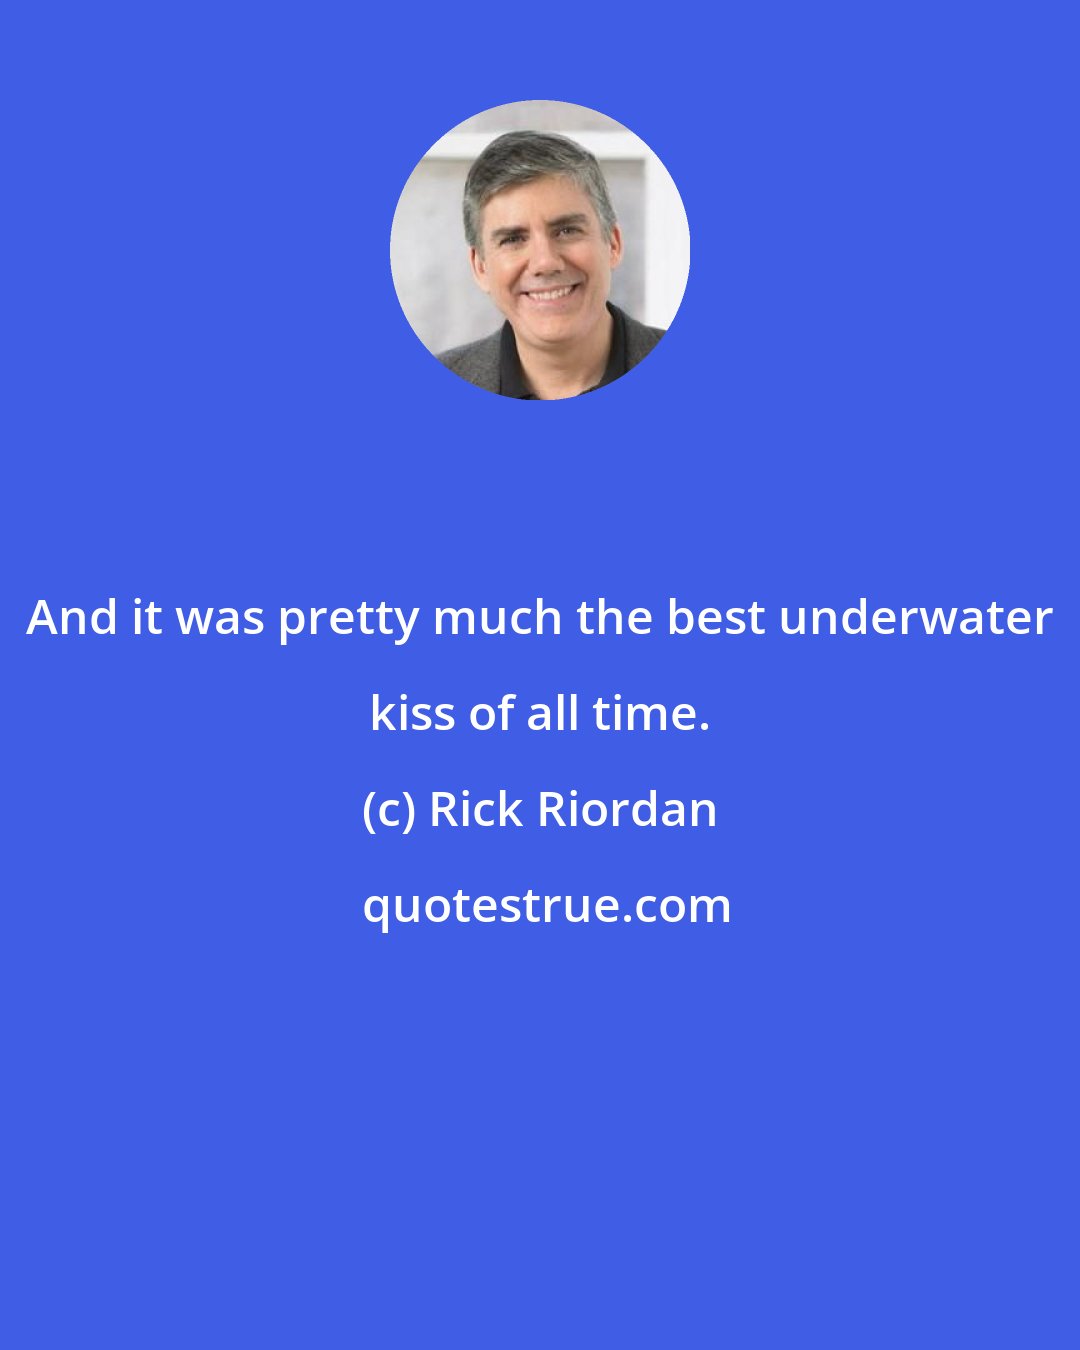 Rick Riordan: And it was pretty much the best underwater kiss of all time.